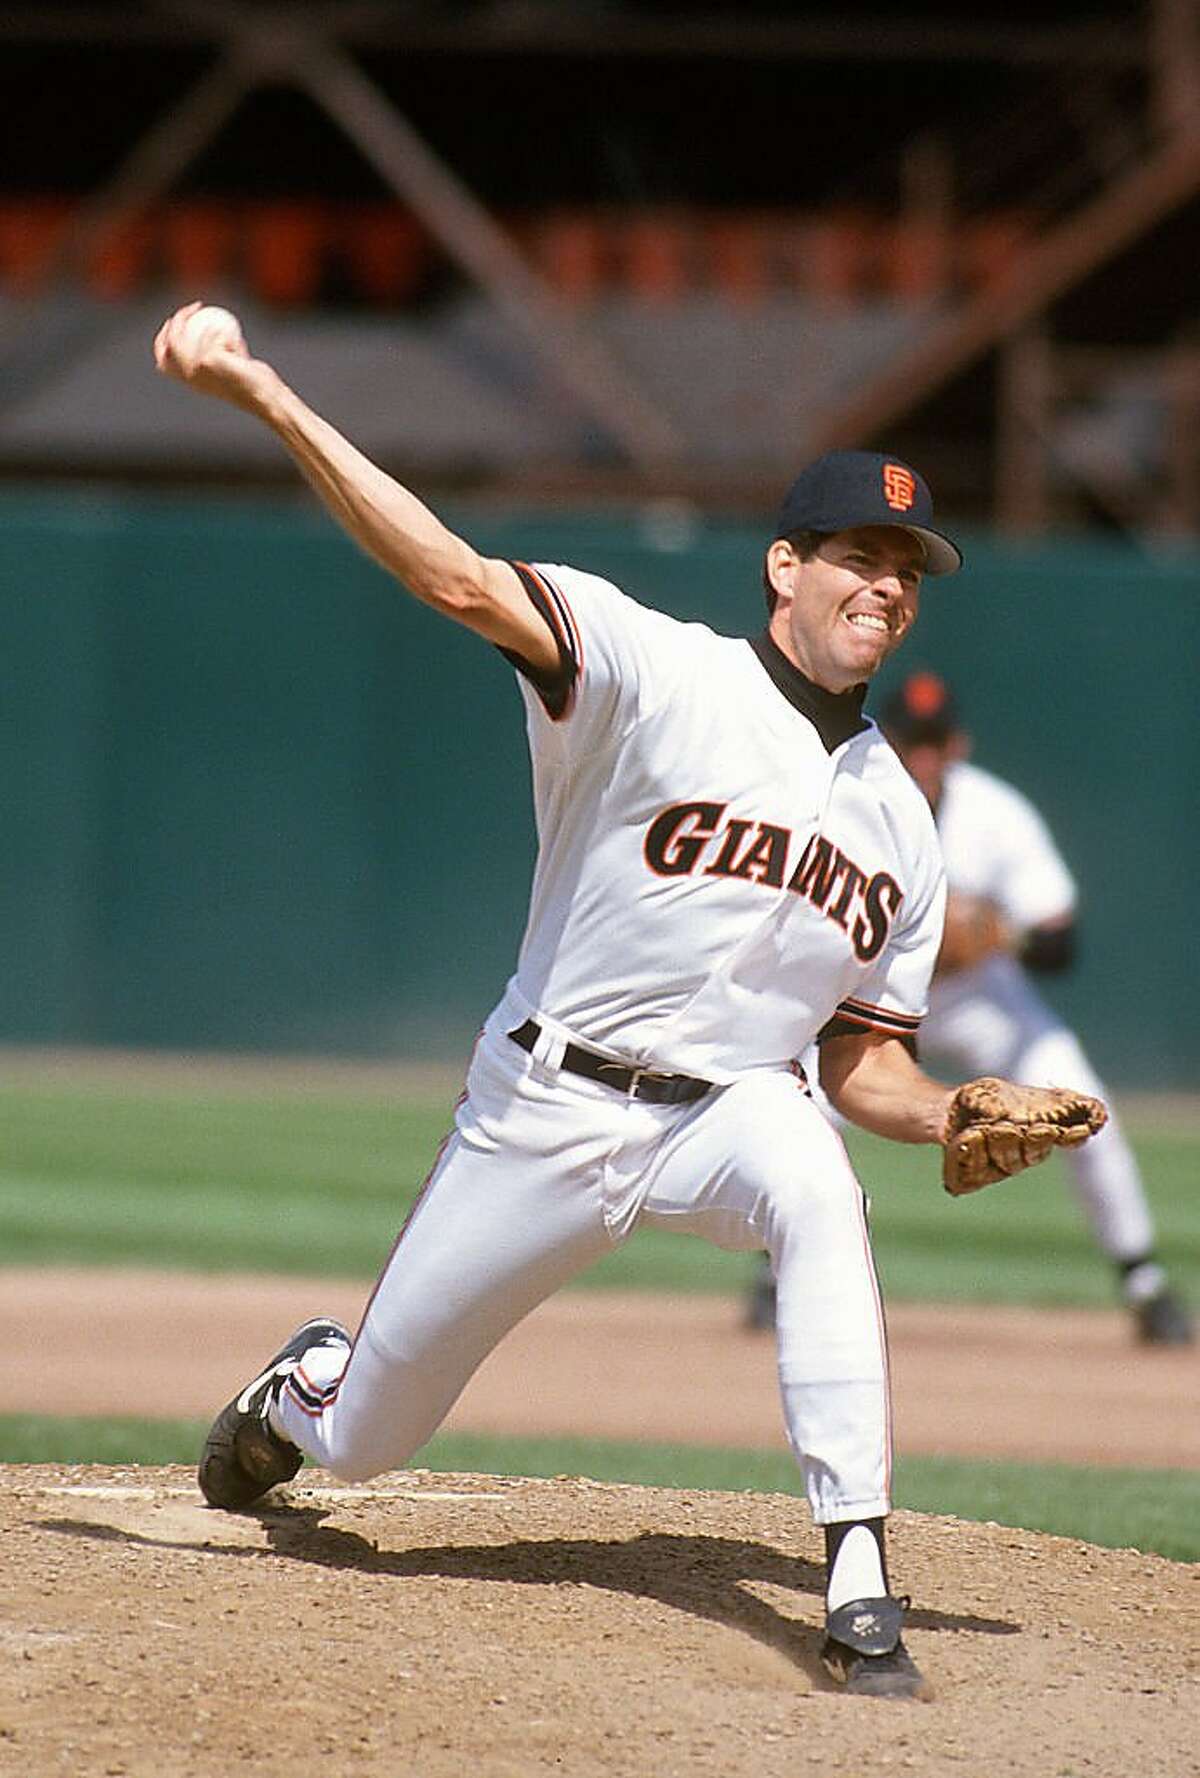 SAN FRANCISCO, CA - CIRCA 1993: Scott Sanderson #29 of the San Francisco Giants pitches during a Major League Baseball game circa 1993 at Candlestick Park in San Francisco, California. Sanderson played for the Giants in 1993. (Photo by Focus on Sport/Getty Images)